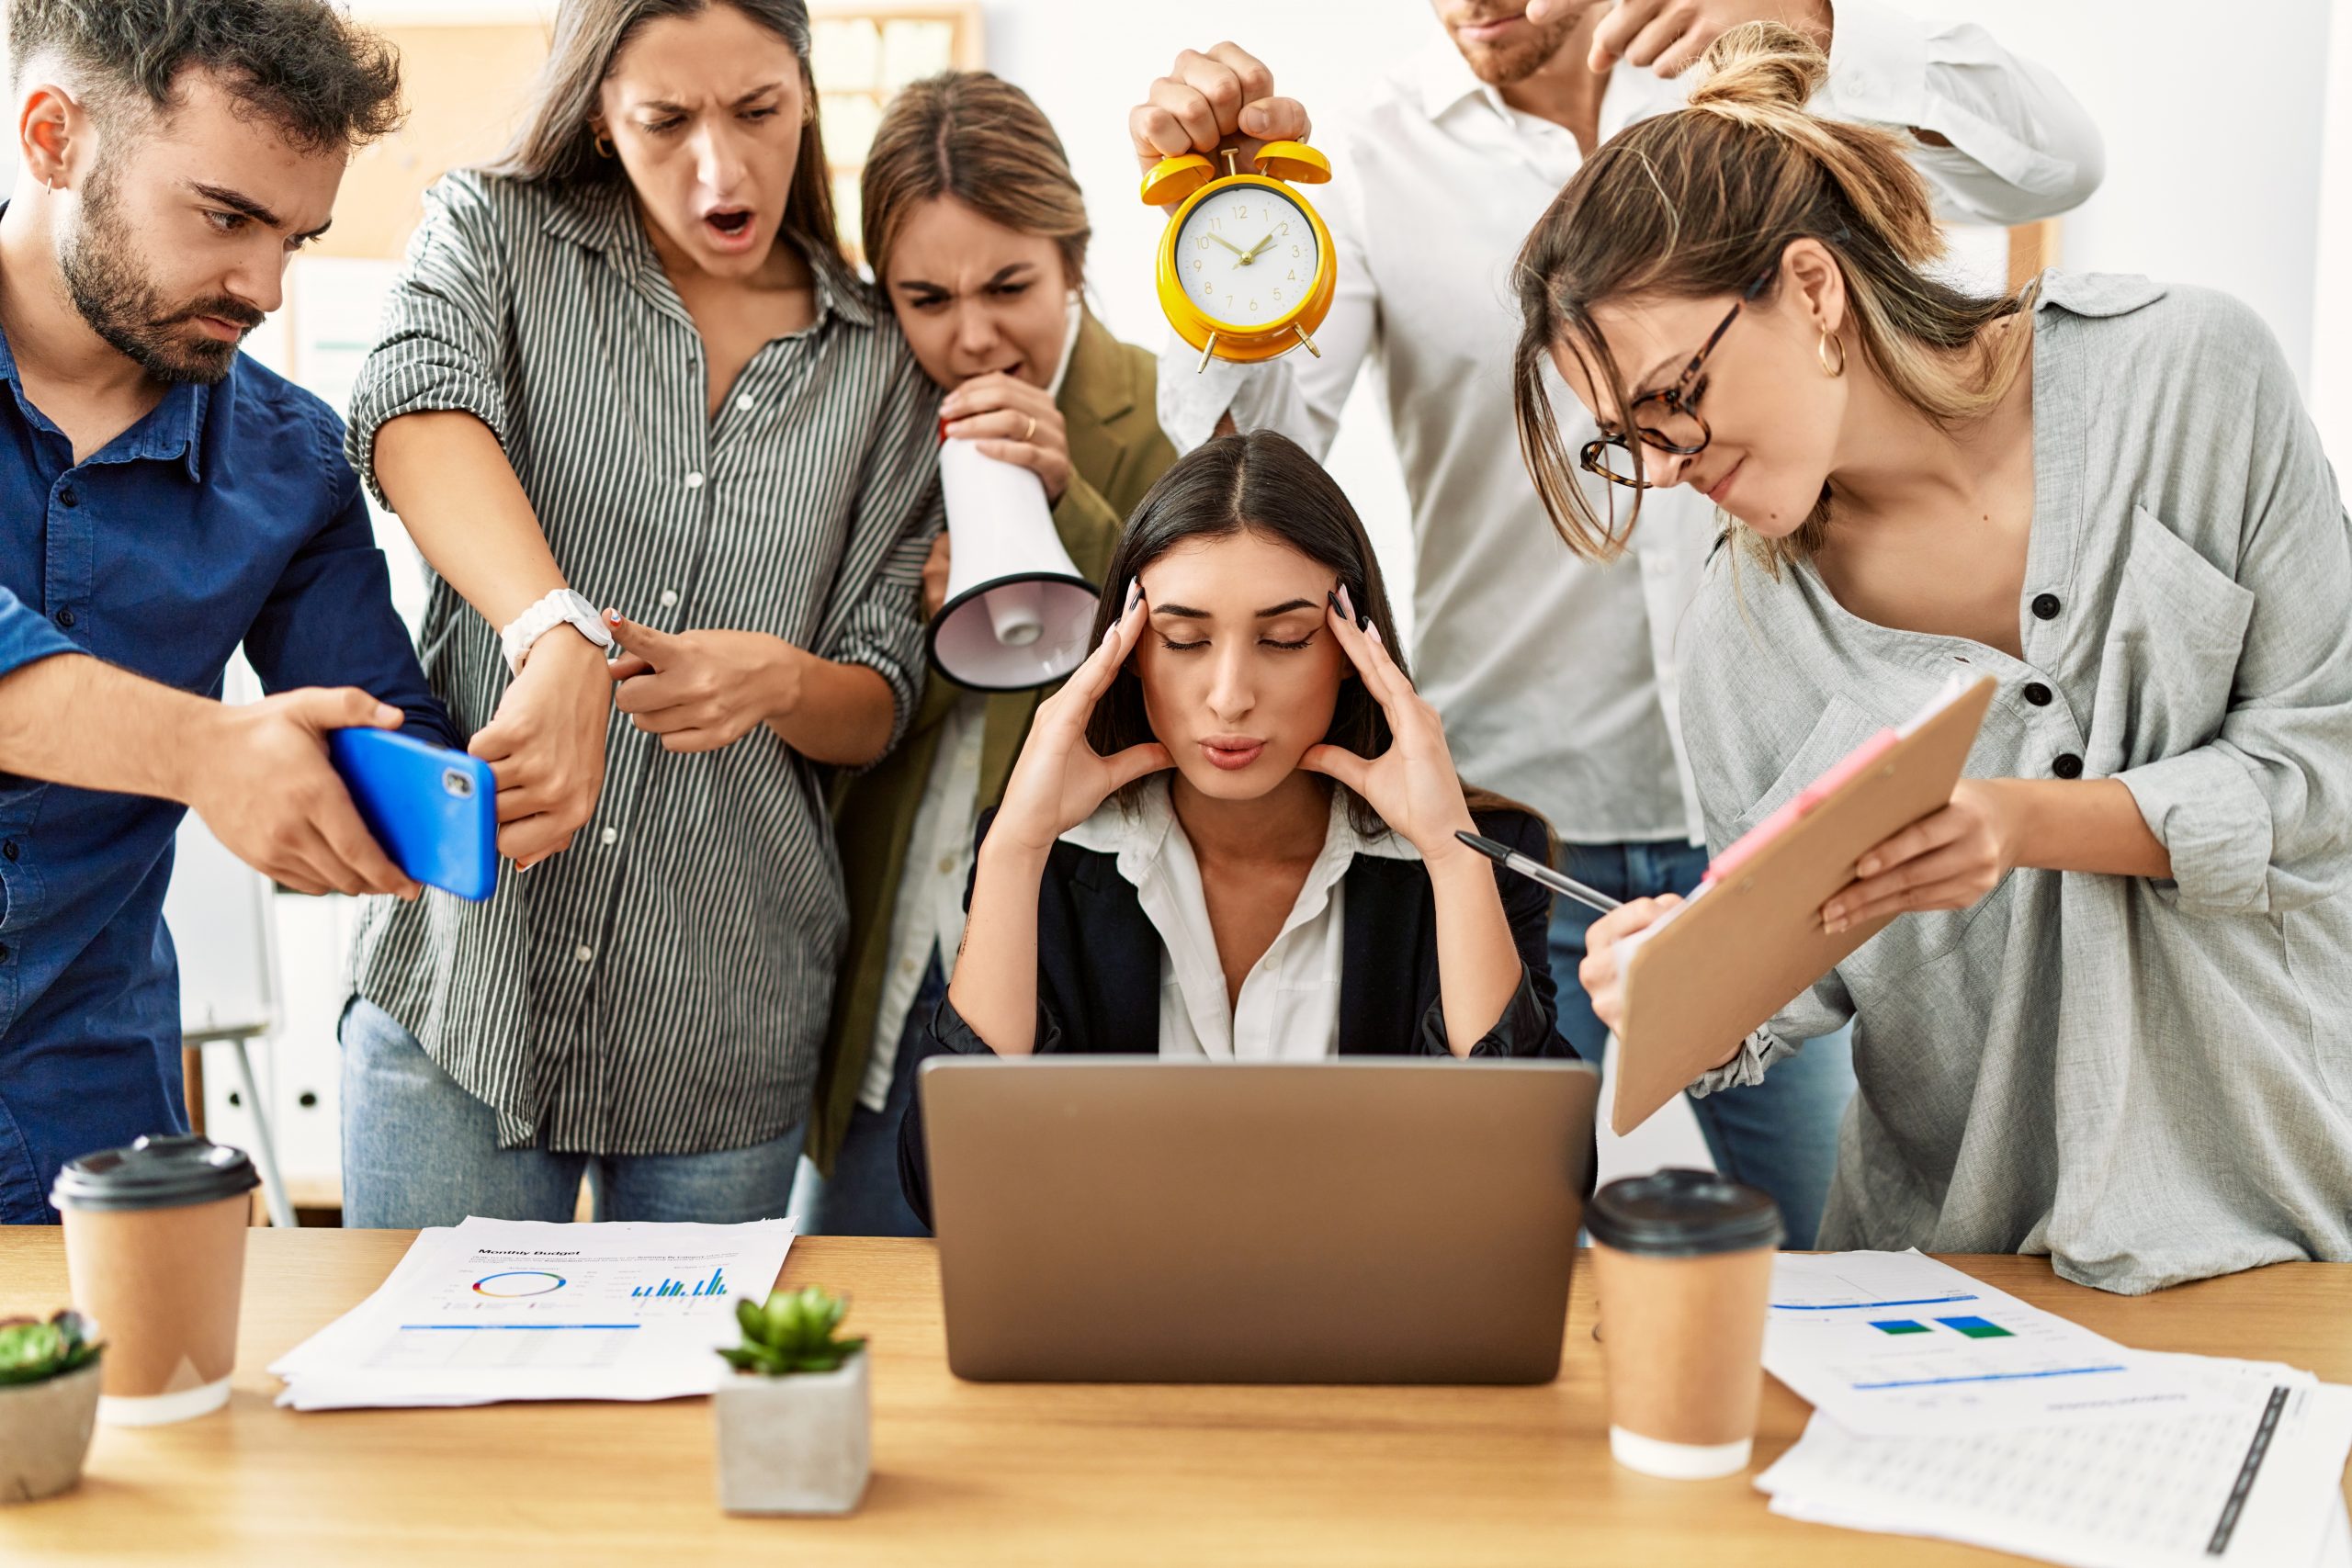 psychological hazards in the workplace